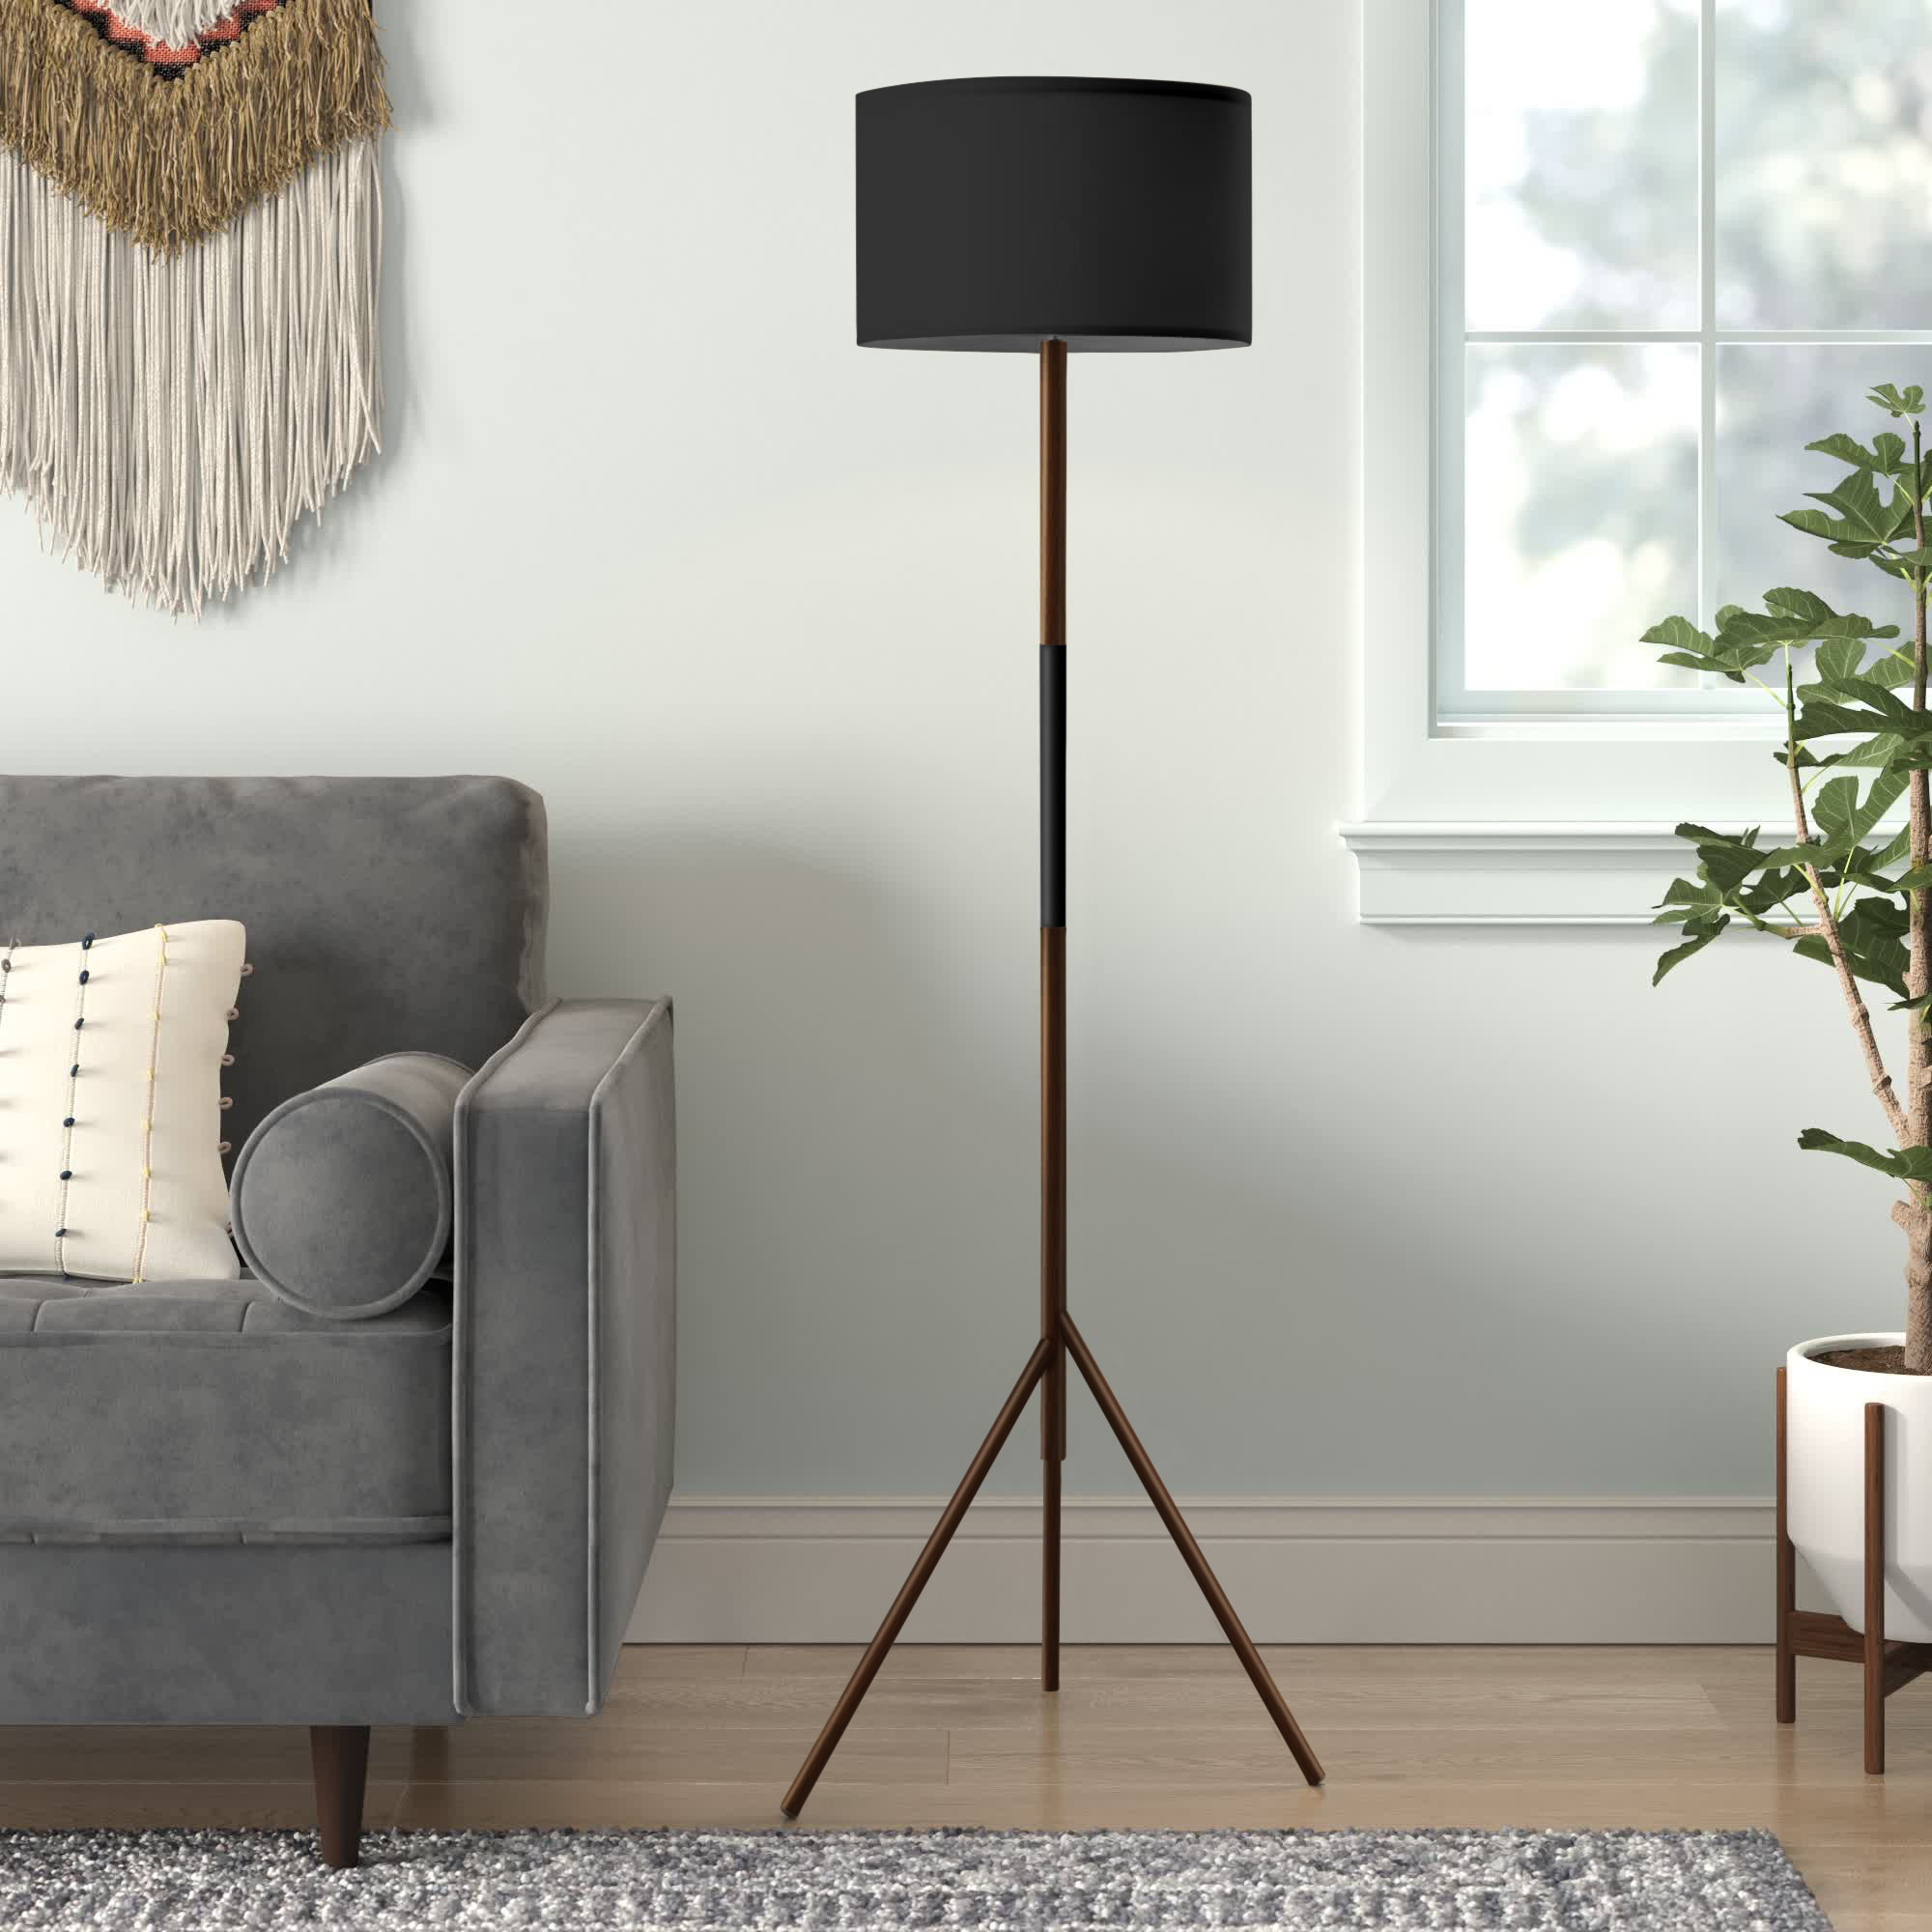 Orren Ellis Topanga 69 LED Torchiere Floor Lamp with Remote Control &  Reviews